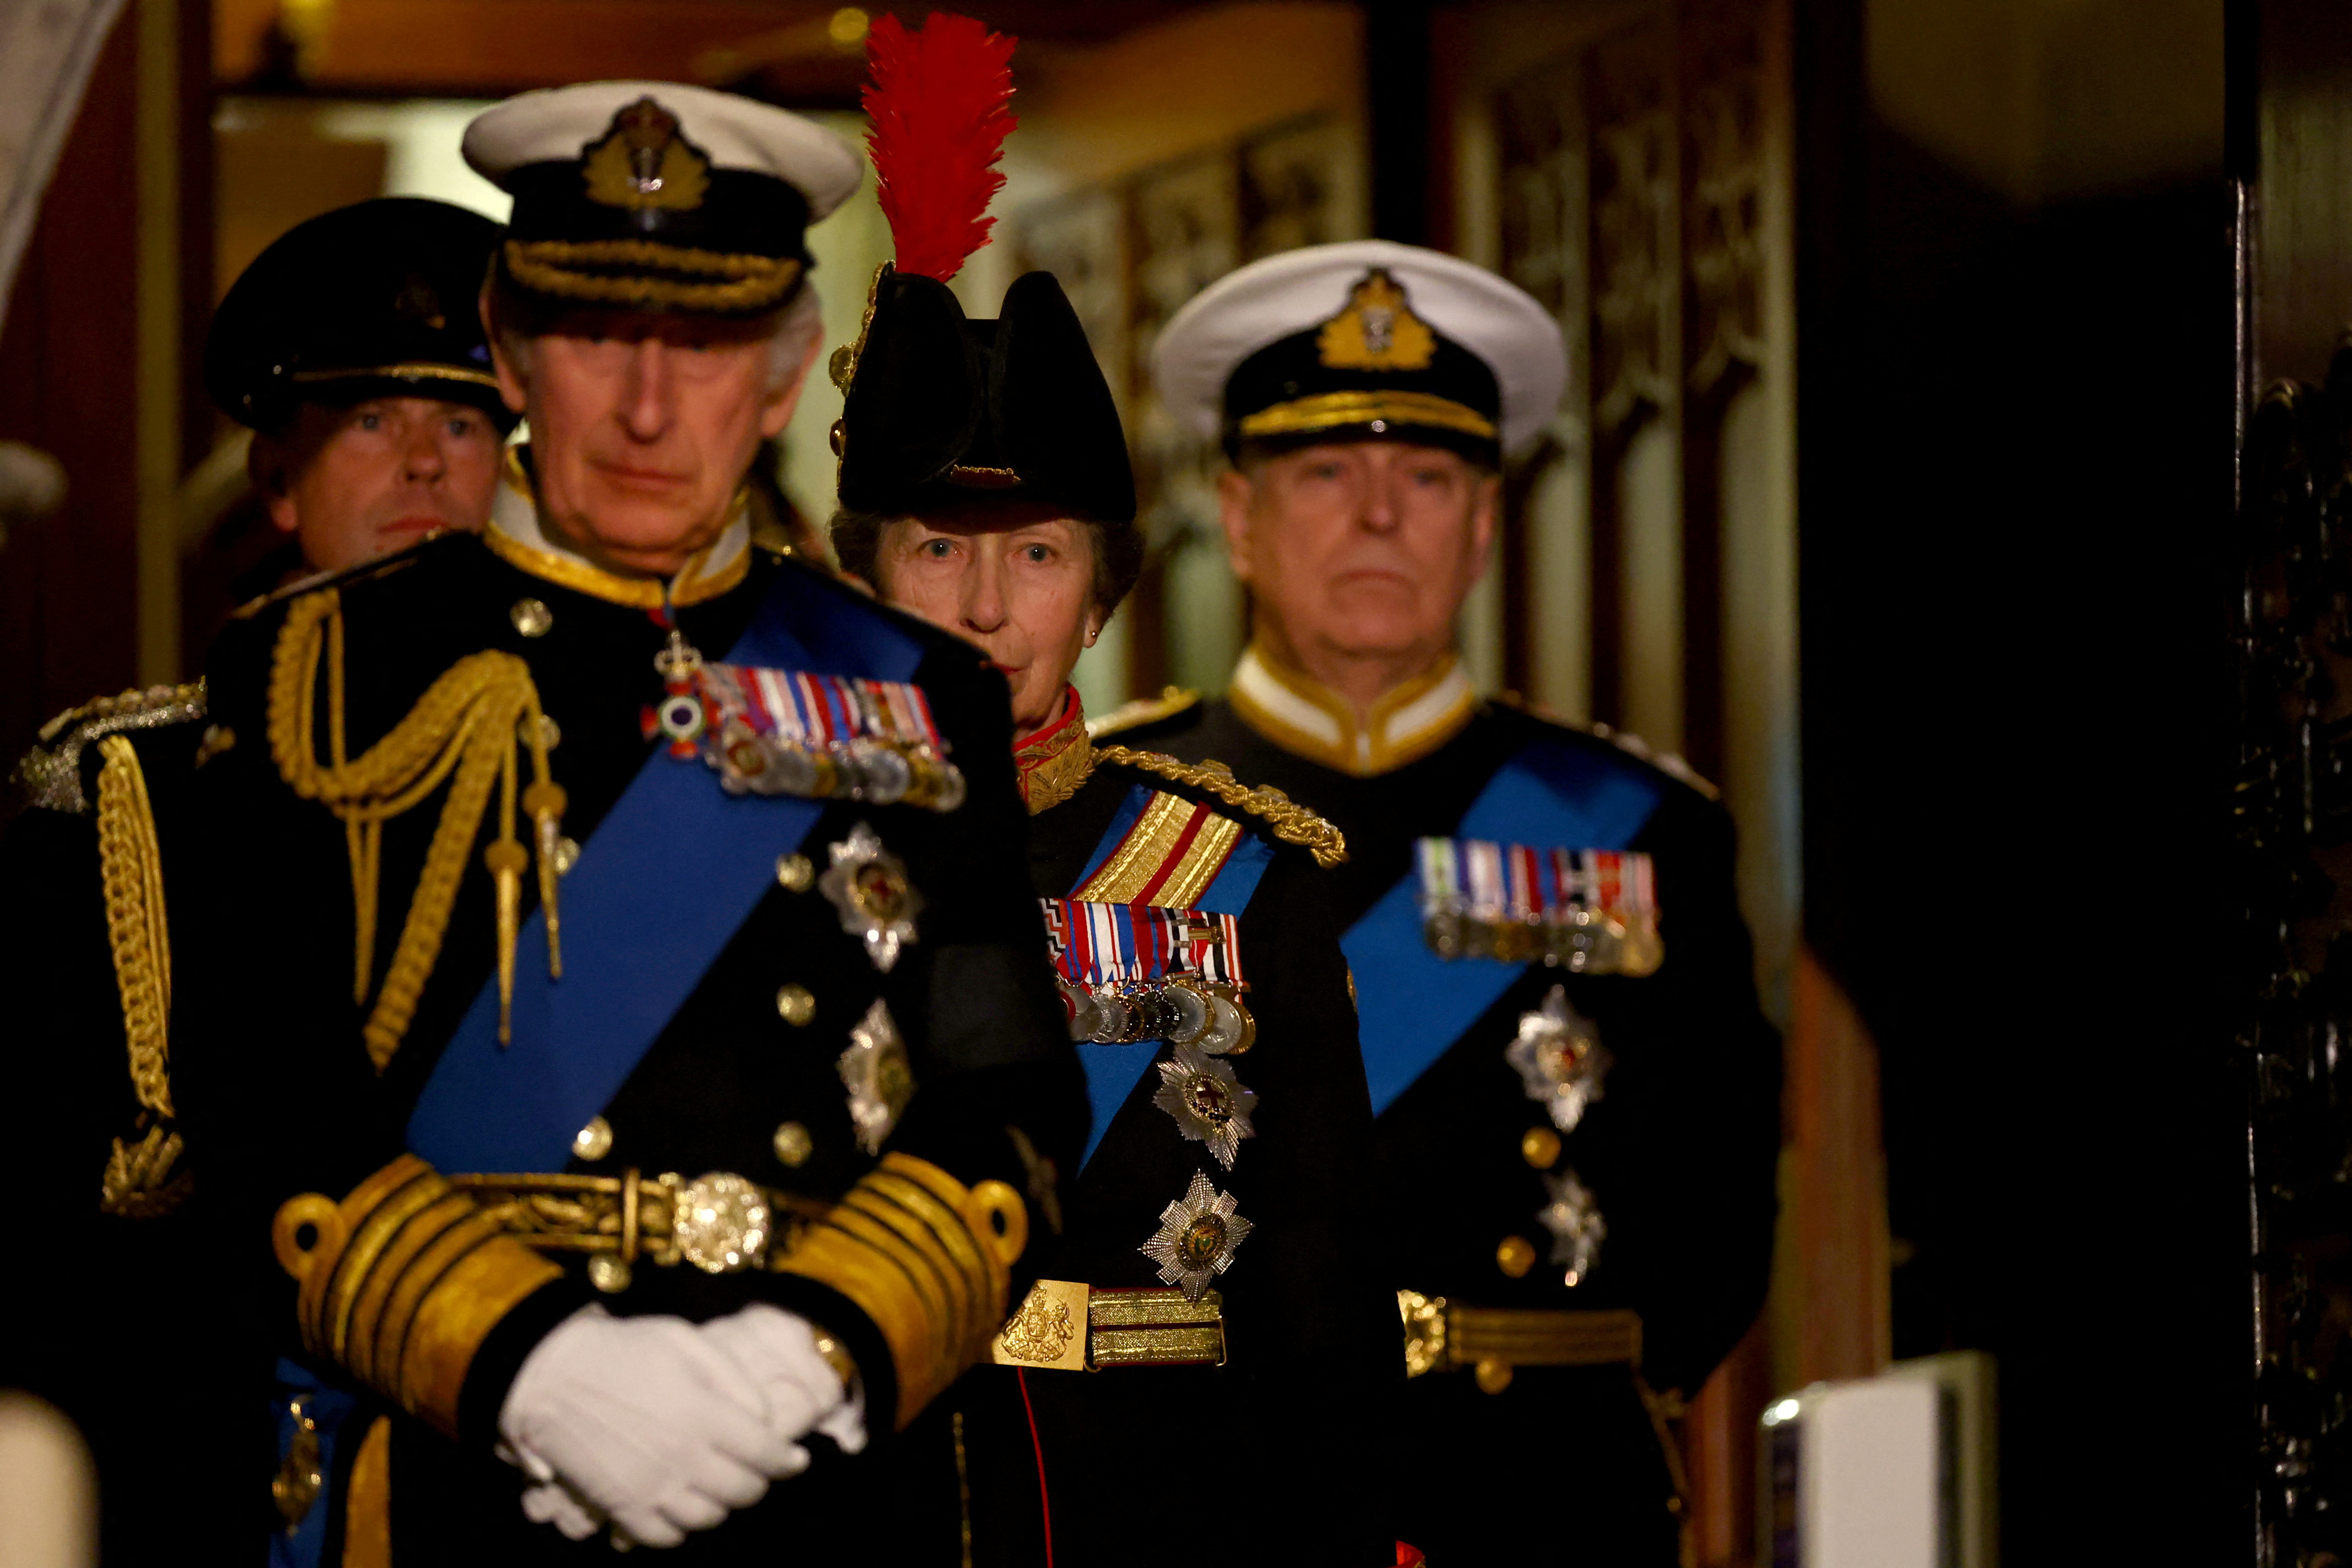 <p>Britain's King Charles III, Prince Edward, Princess Anne and Prince Andrew arrived to attend a vigil for their mother, Queen Elizabeth II, inside London's Westminster Hall on Sept. 16, 2022. Andrew, the Duke of York, was permitted to wear his naval uniform just for this event, despite previously having to step back as a working royal amid a scandal. After entering the vast hall, the late monarch's four children walked up the catafalque -- the raised platform upon which her casket rested -- and each stood on a different side of the coffin facing crowds of mourners walking past to pay their respects ahead of the queen's funeral on Sept. 19.</p>